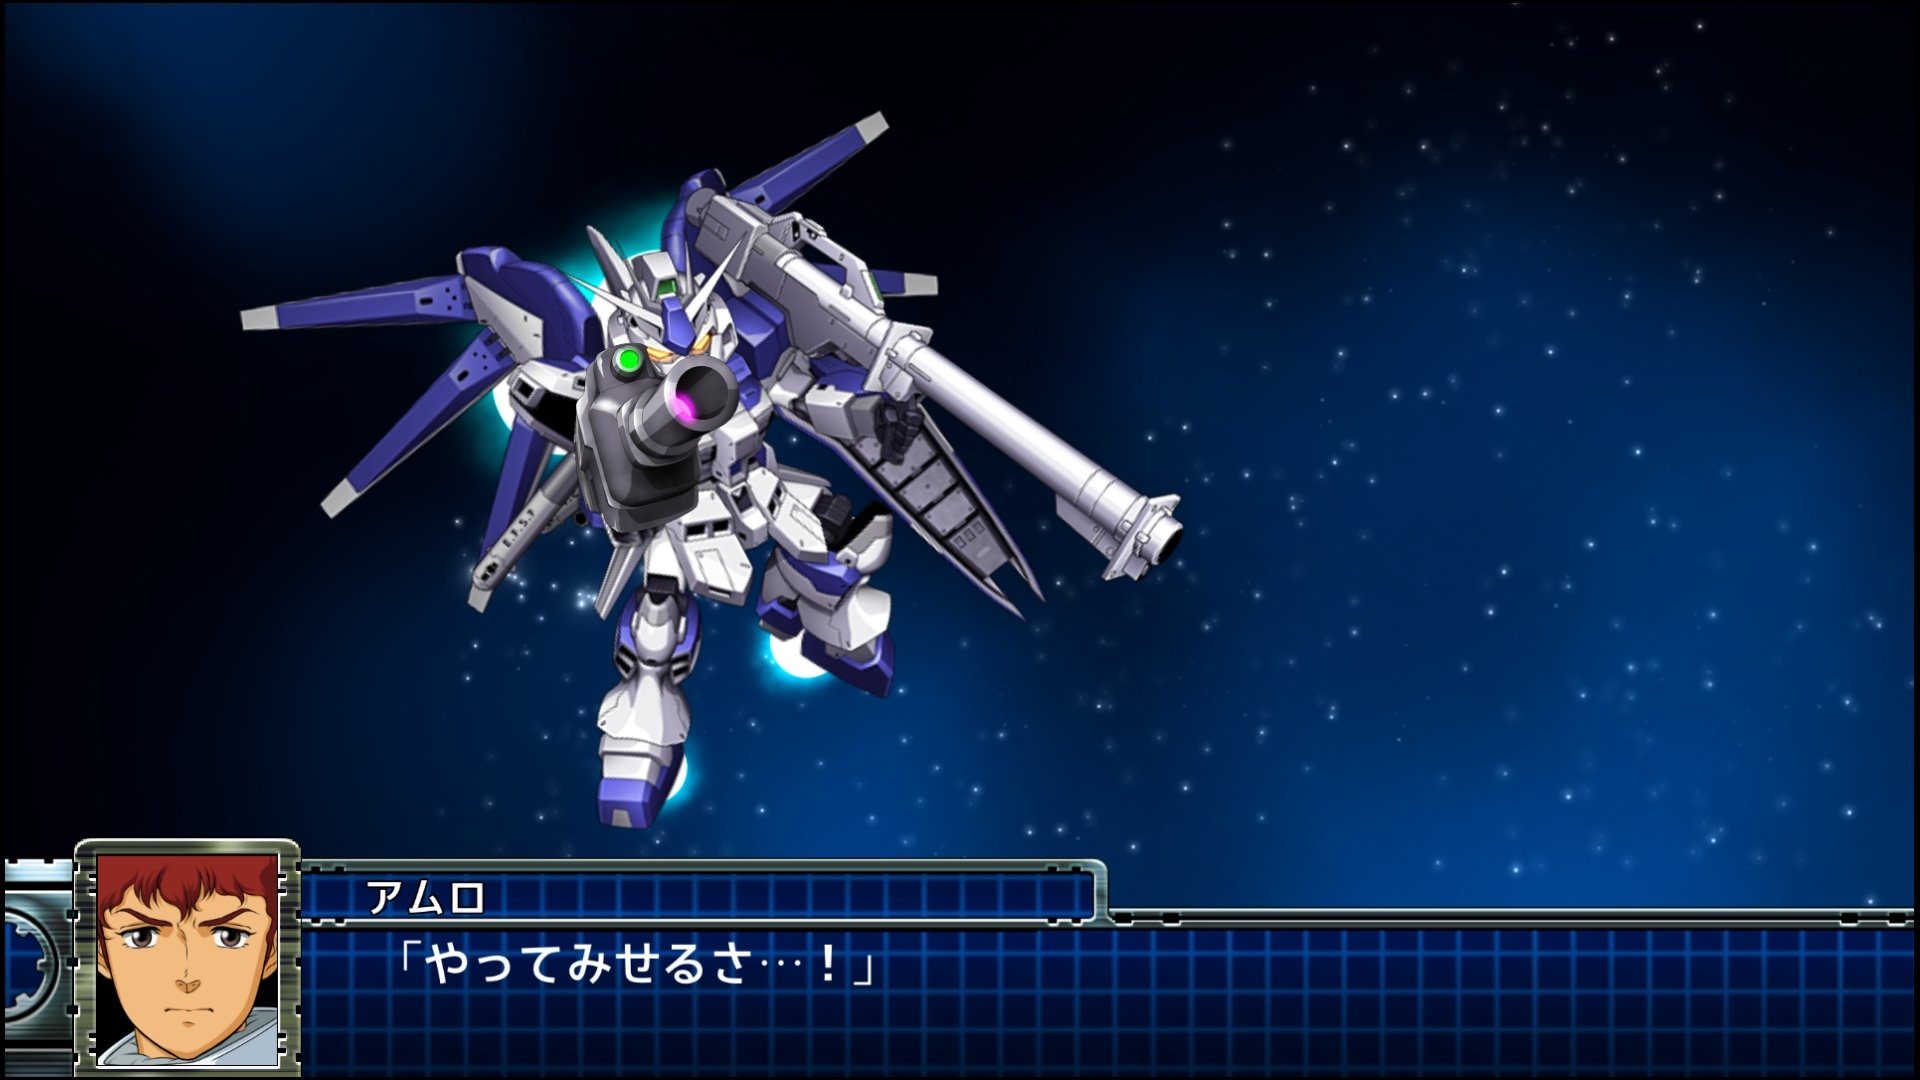 Super Robot Wars T Launches In Japan On March 20, 2019 With Premium Anime  Song & Sound Edition - Siliconera